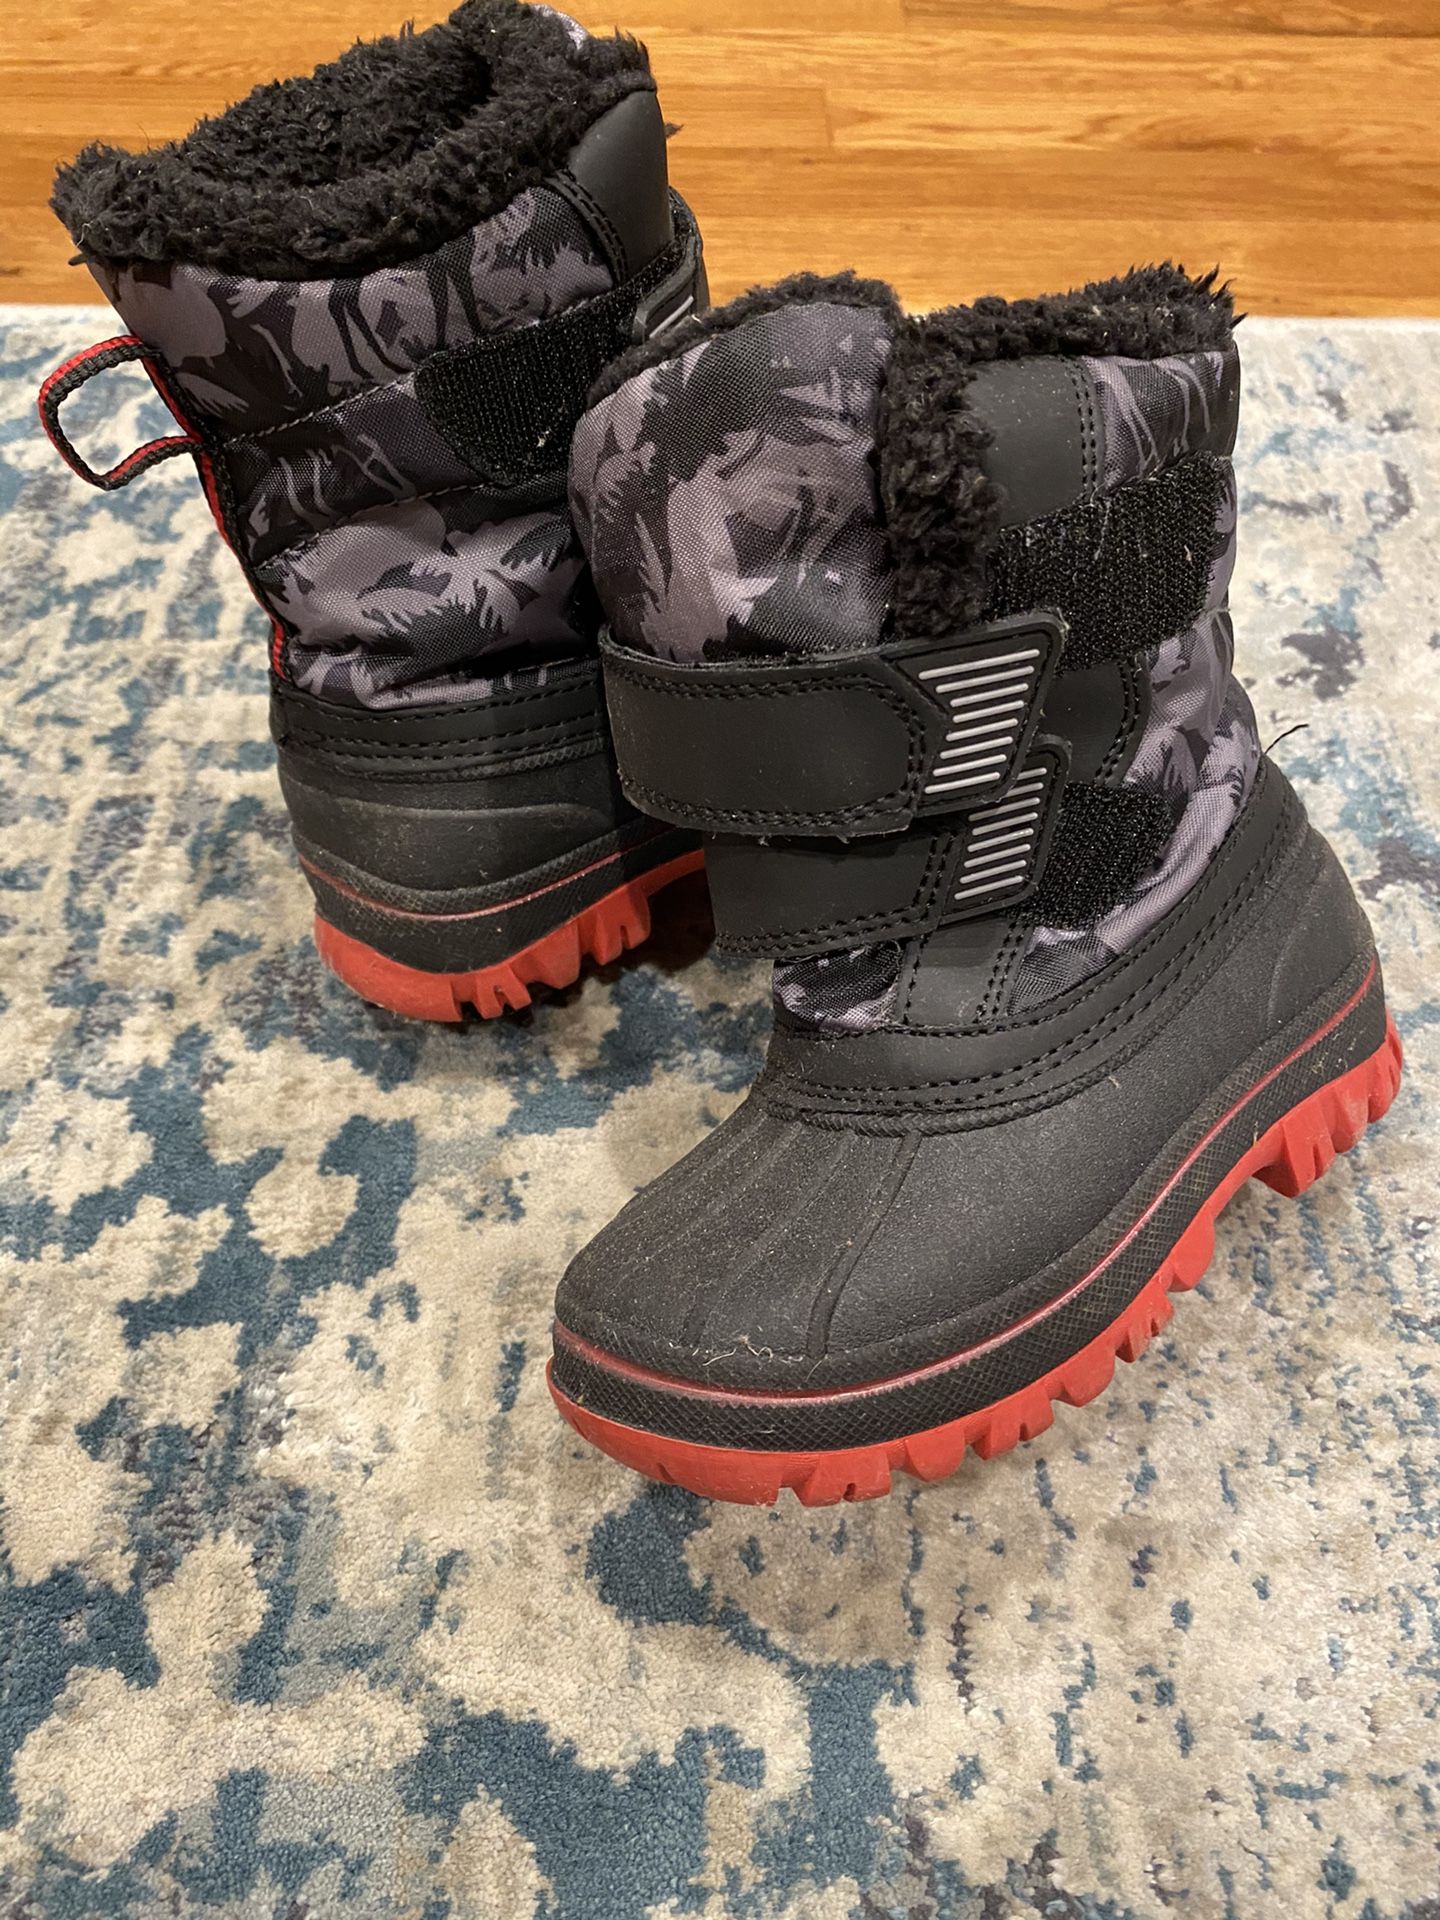 Thermolite Toddler Snow Boots (size 7/8)